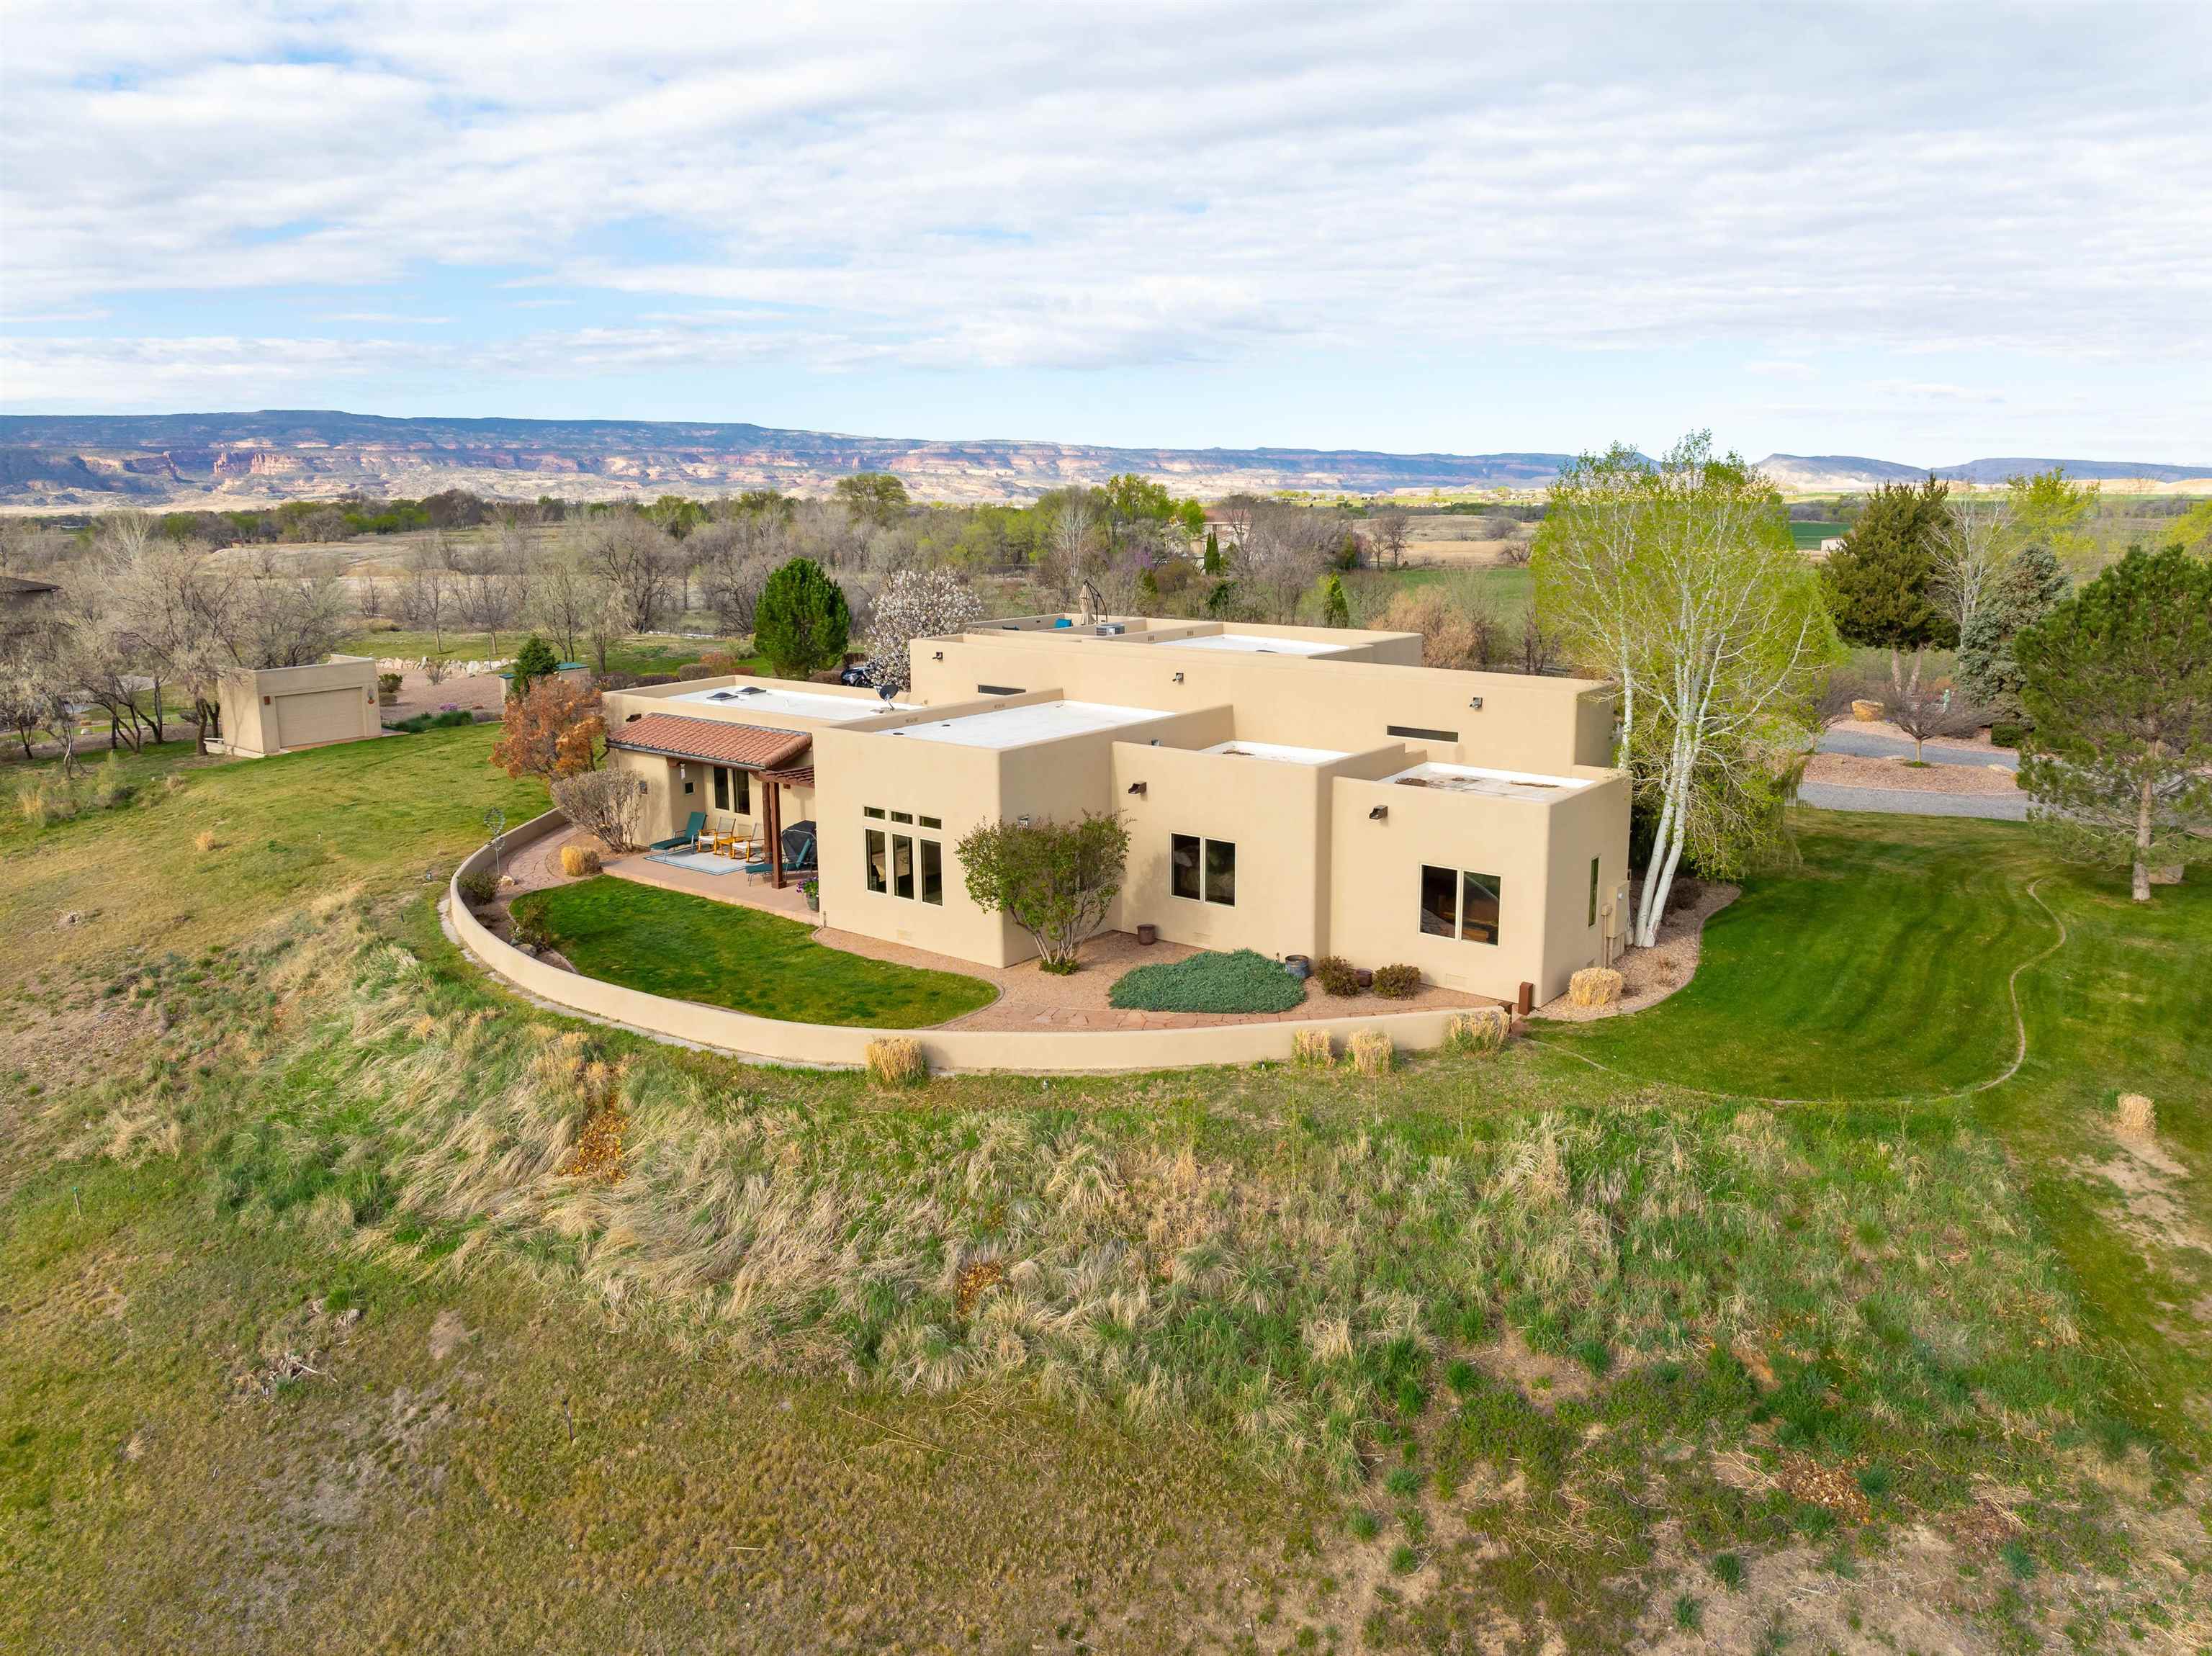 A custom built Spanish stunner perfectly perched to take in 360 degree Grand Valley views from every window and courtyard.  Quality 2x6 construction and beautiful finishes compliment the interior throughout.  The primary suite has been updated and an additional 882sf bonus room and office area was added in 2018, outside you'll find a freshly painted stucco exterior and a roof top deck that will take your breath away. Words don't do this one justice, book your private showing today!